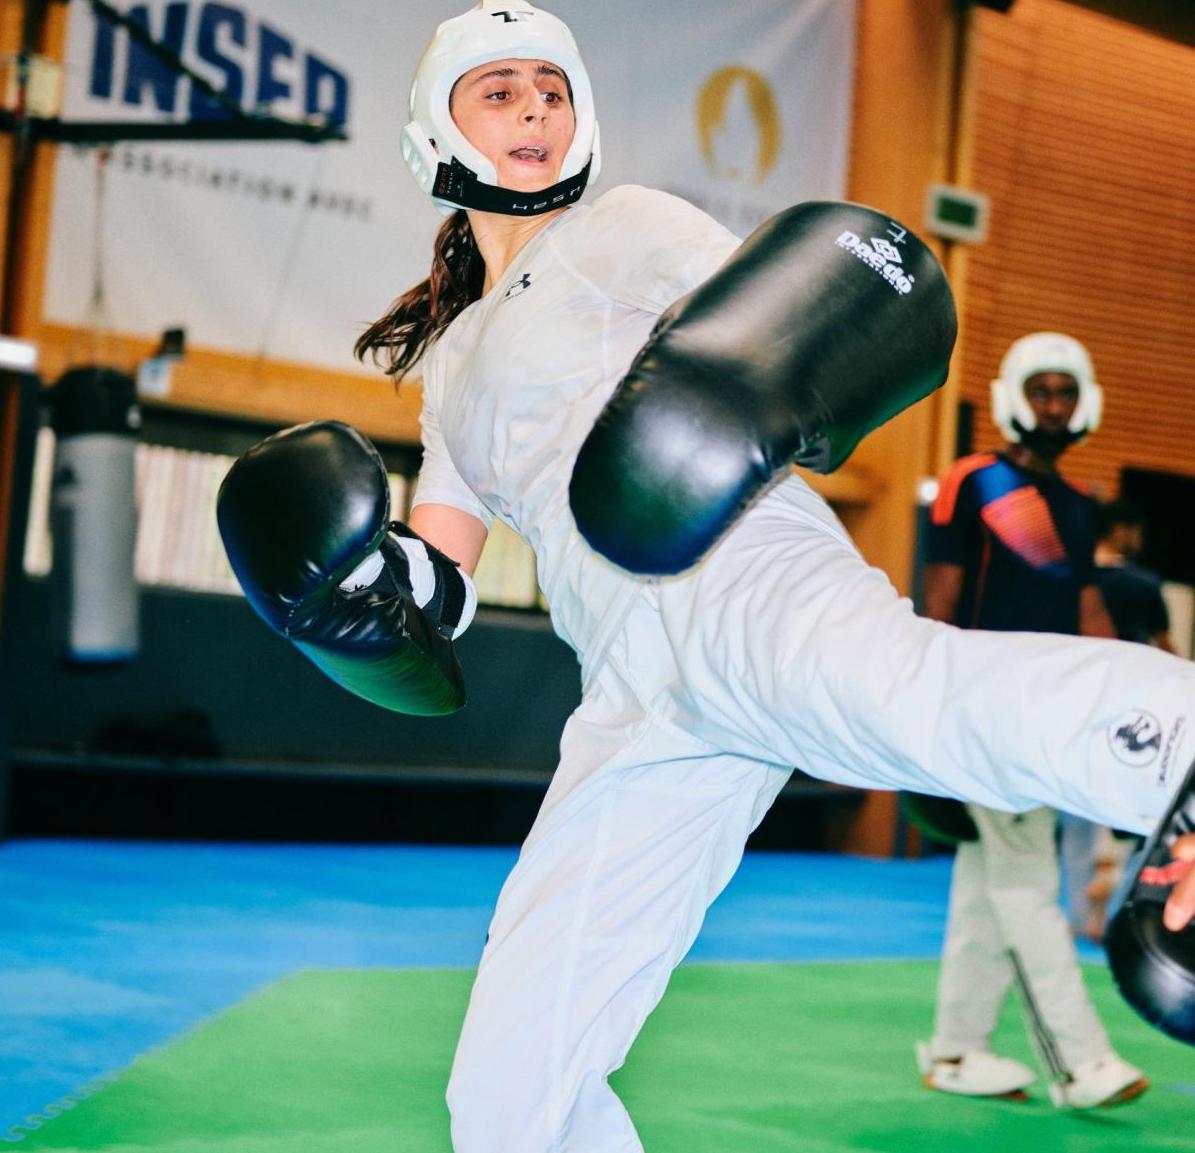 Join us tomorrow for a LiveTalk with @MarziehHamidi, a taekwondo athlete & Afghan refugee living in France, aiming for the @Olympics refugee team at Paris 2024. She dreams of winning a medal for “all women of Afghanistan.” Register here for free: lnkd.in/etGCkJUb